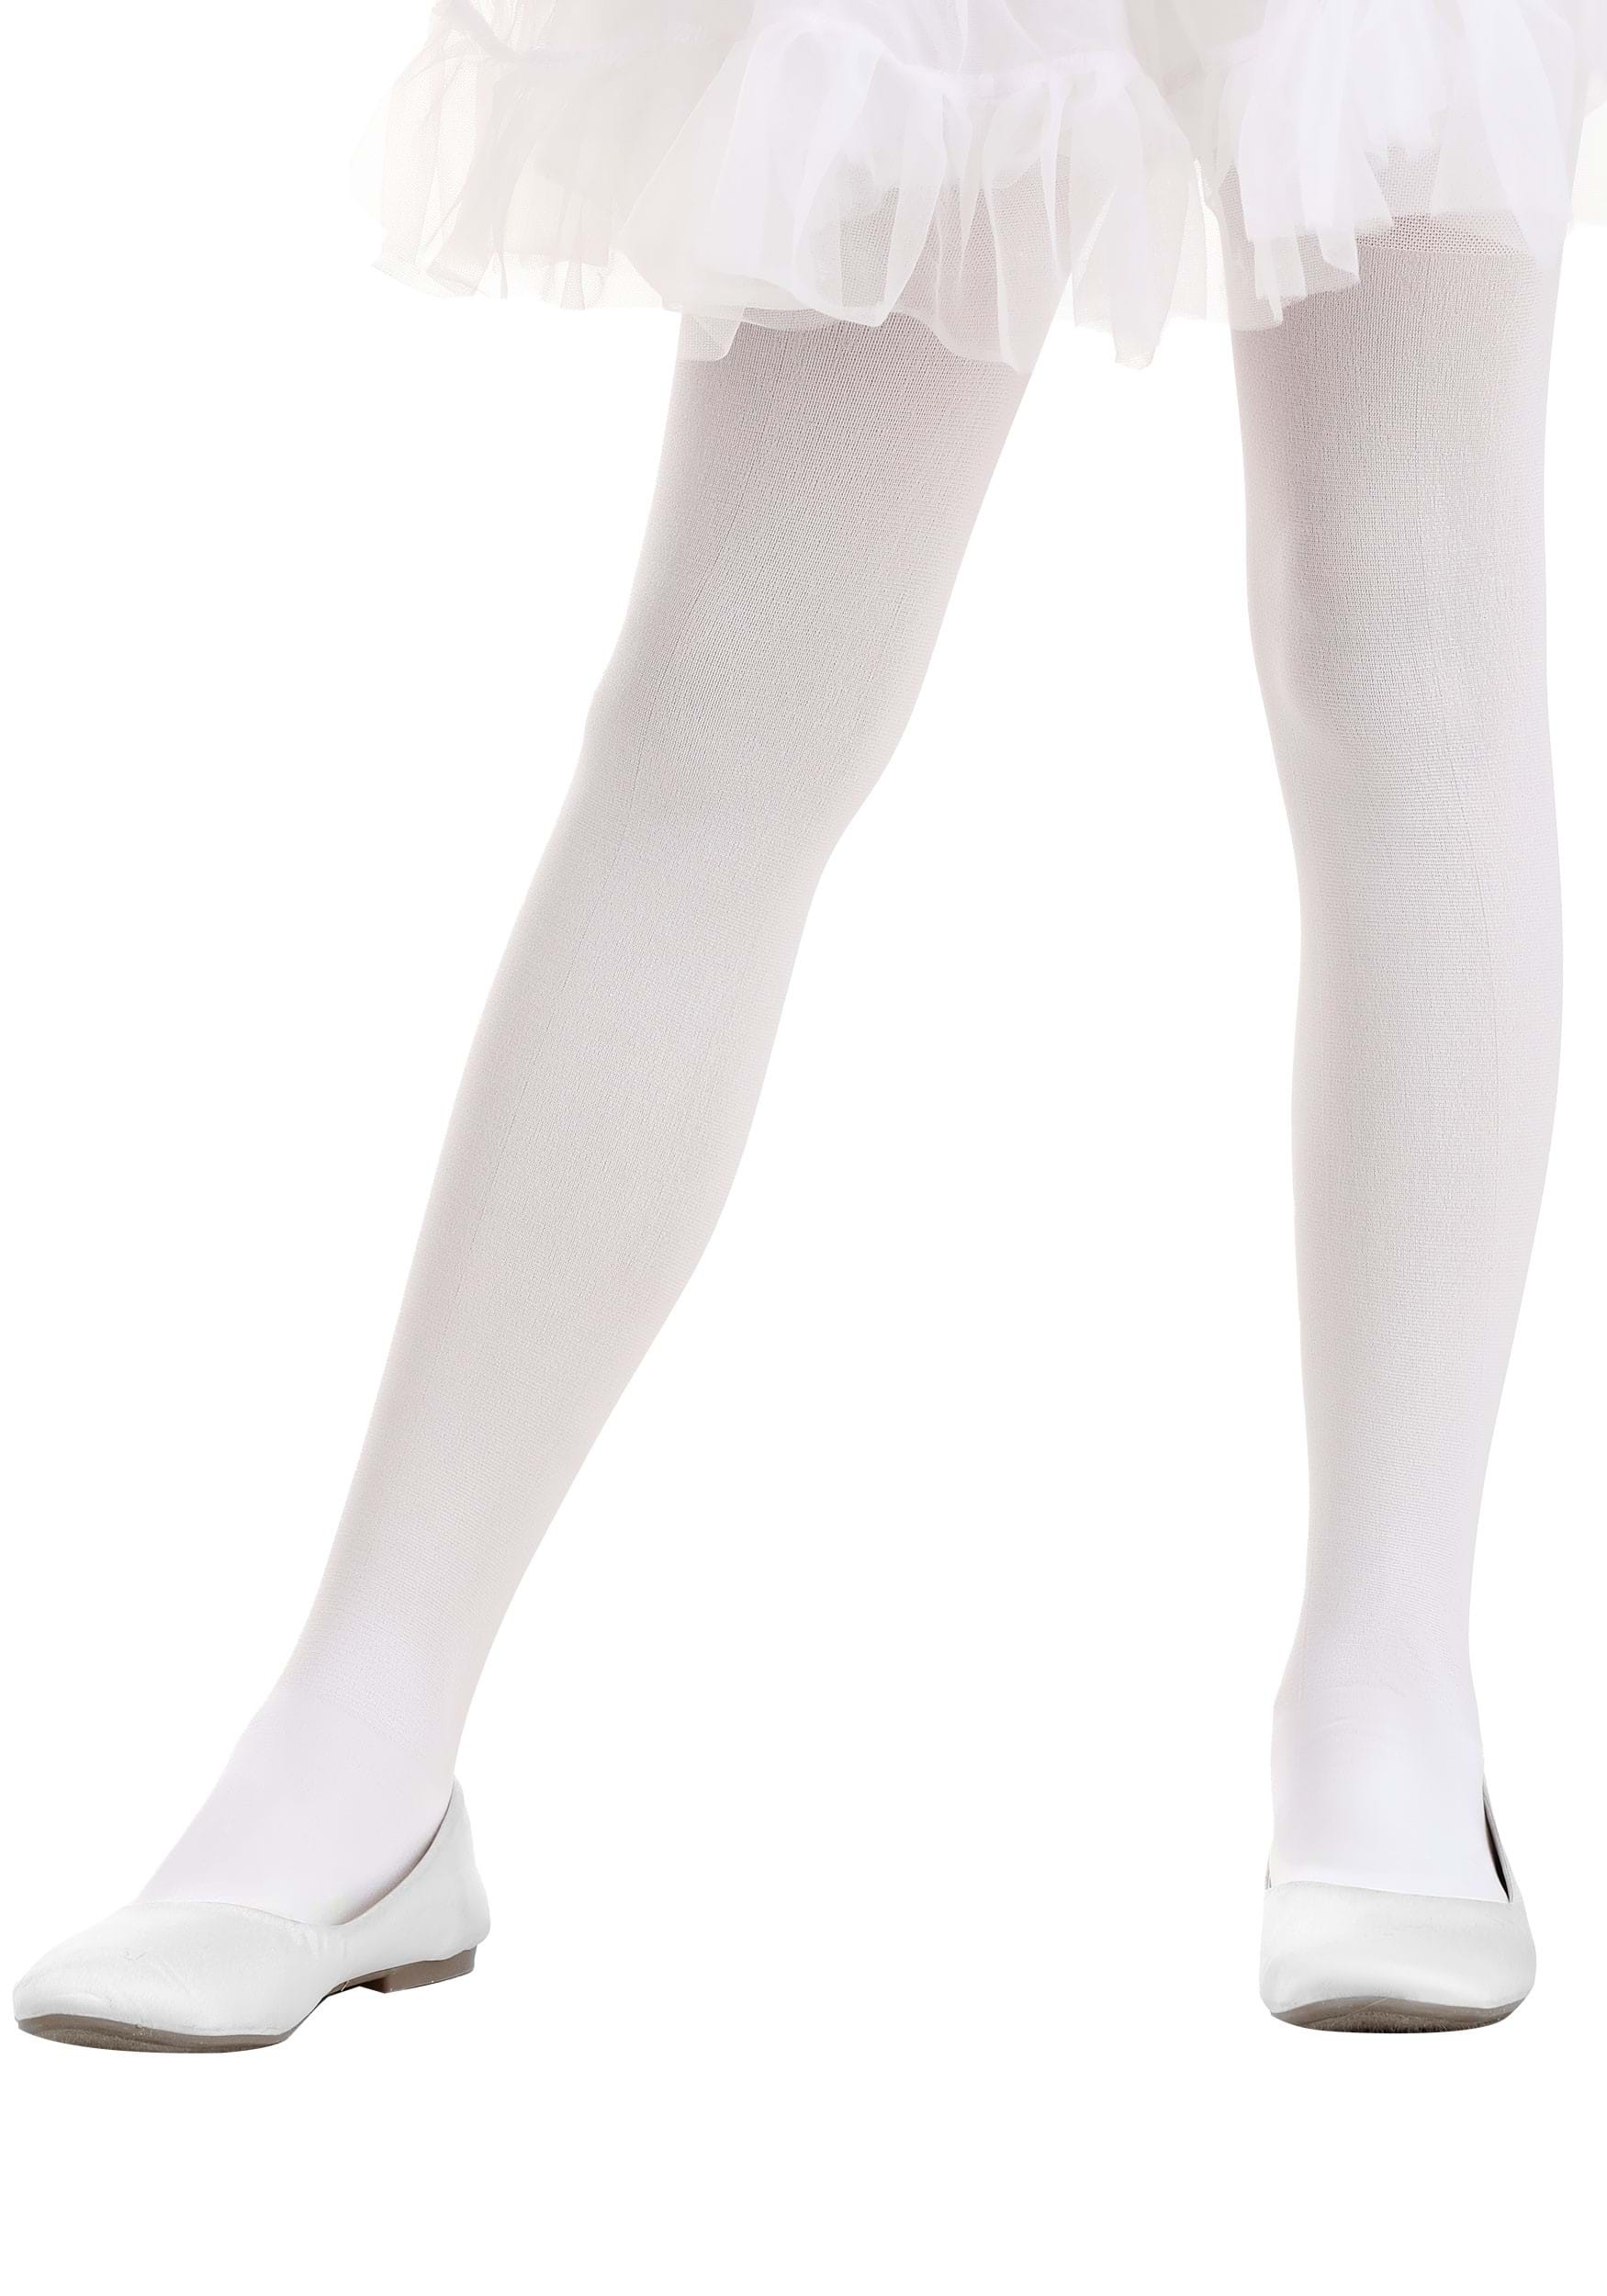 White Tights: A Do Or A Don't?